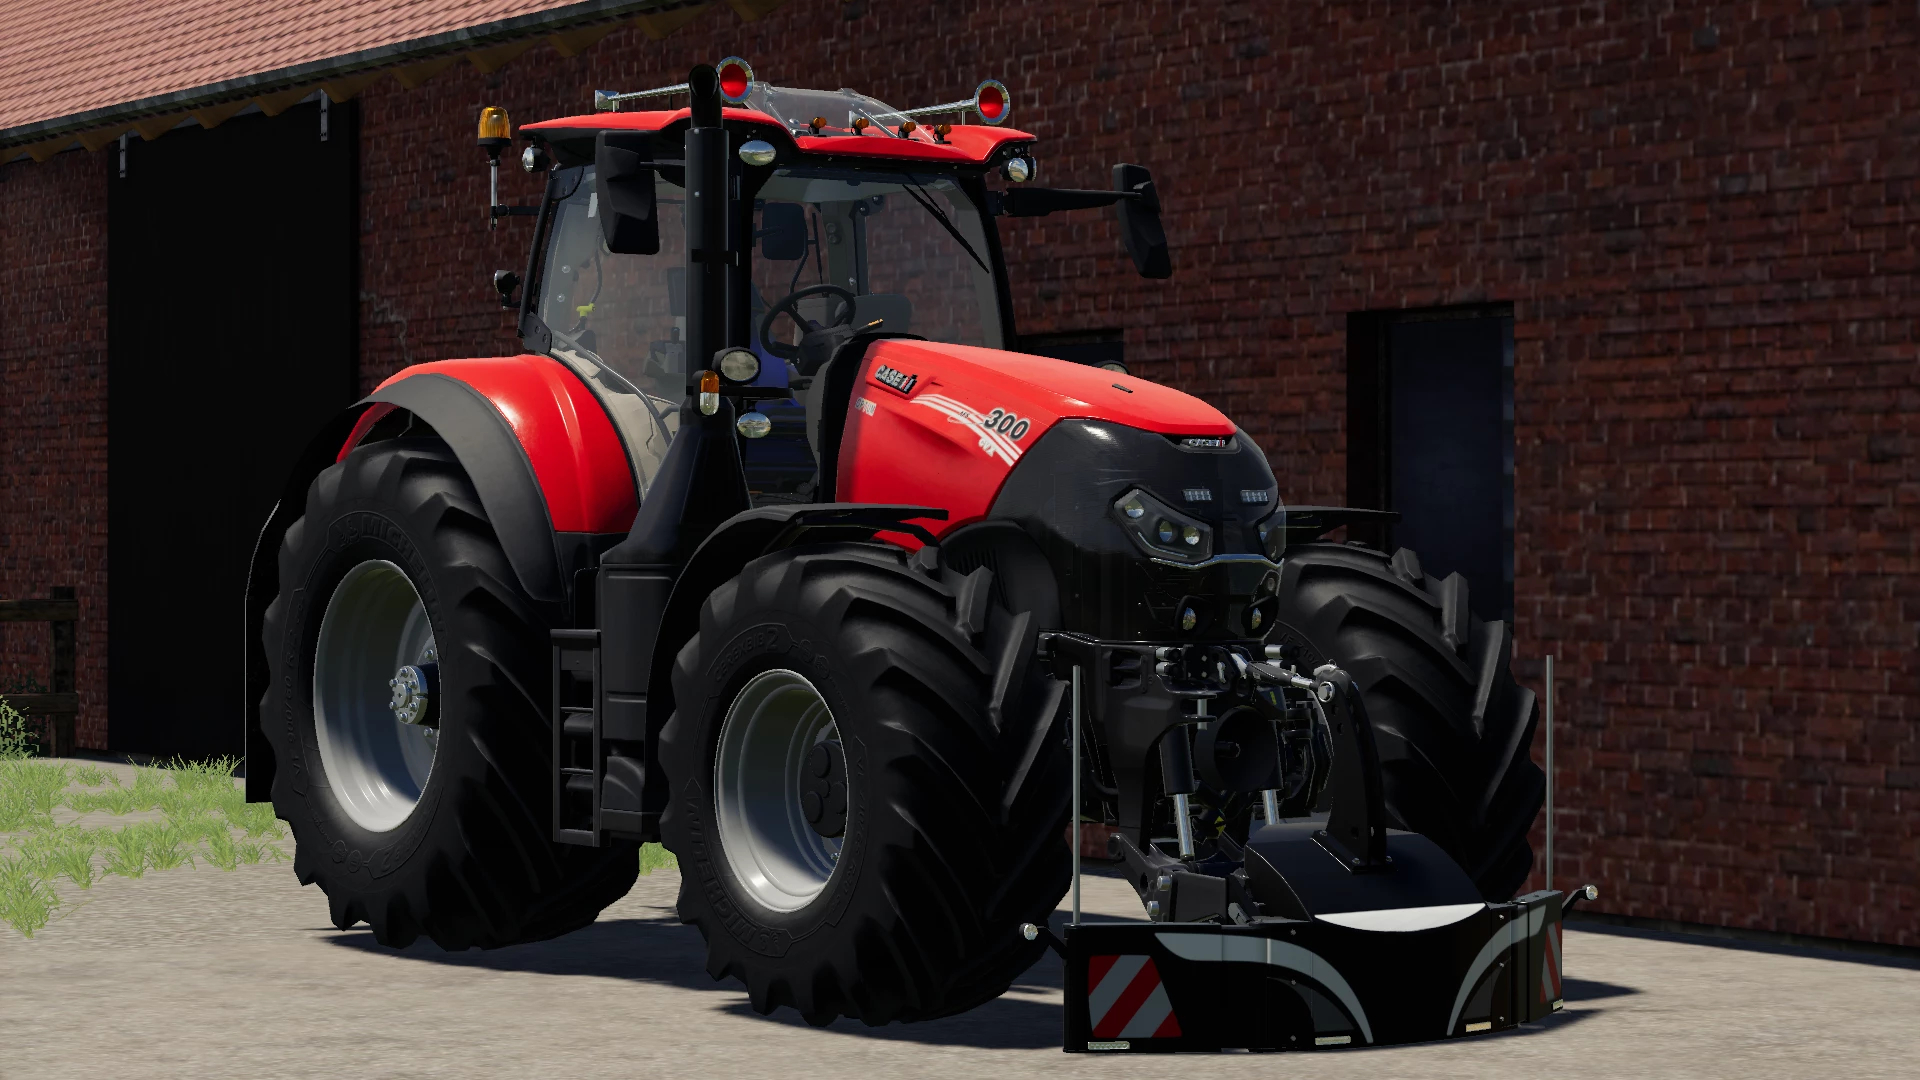 Case Ih Optum Nose Weight V1000 Ls22 Farming Simulator 22 Mod Images And Photos Finder 6354